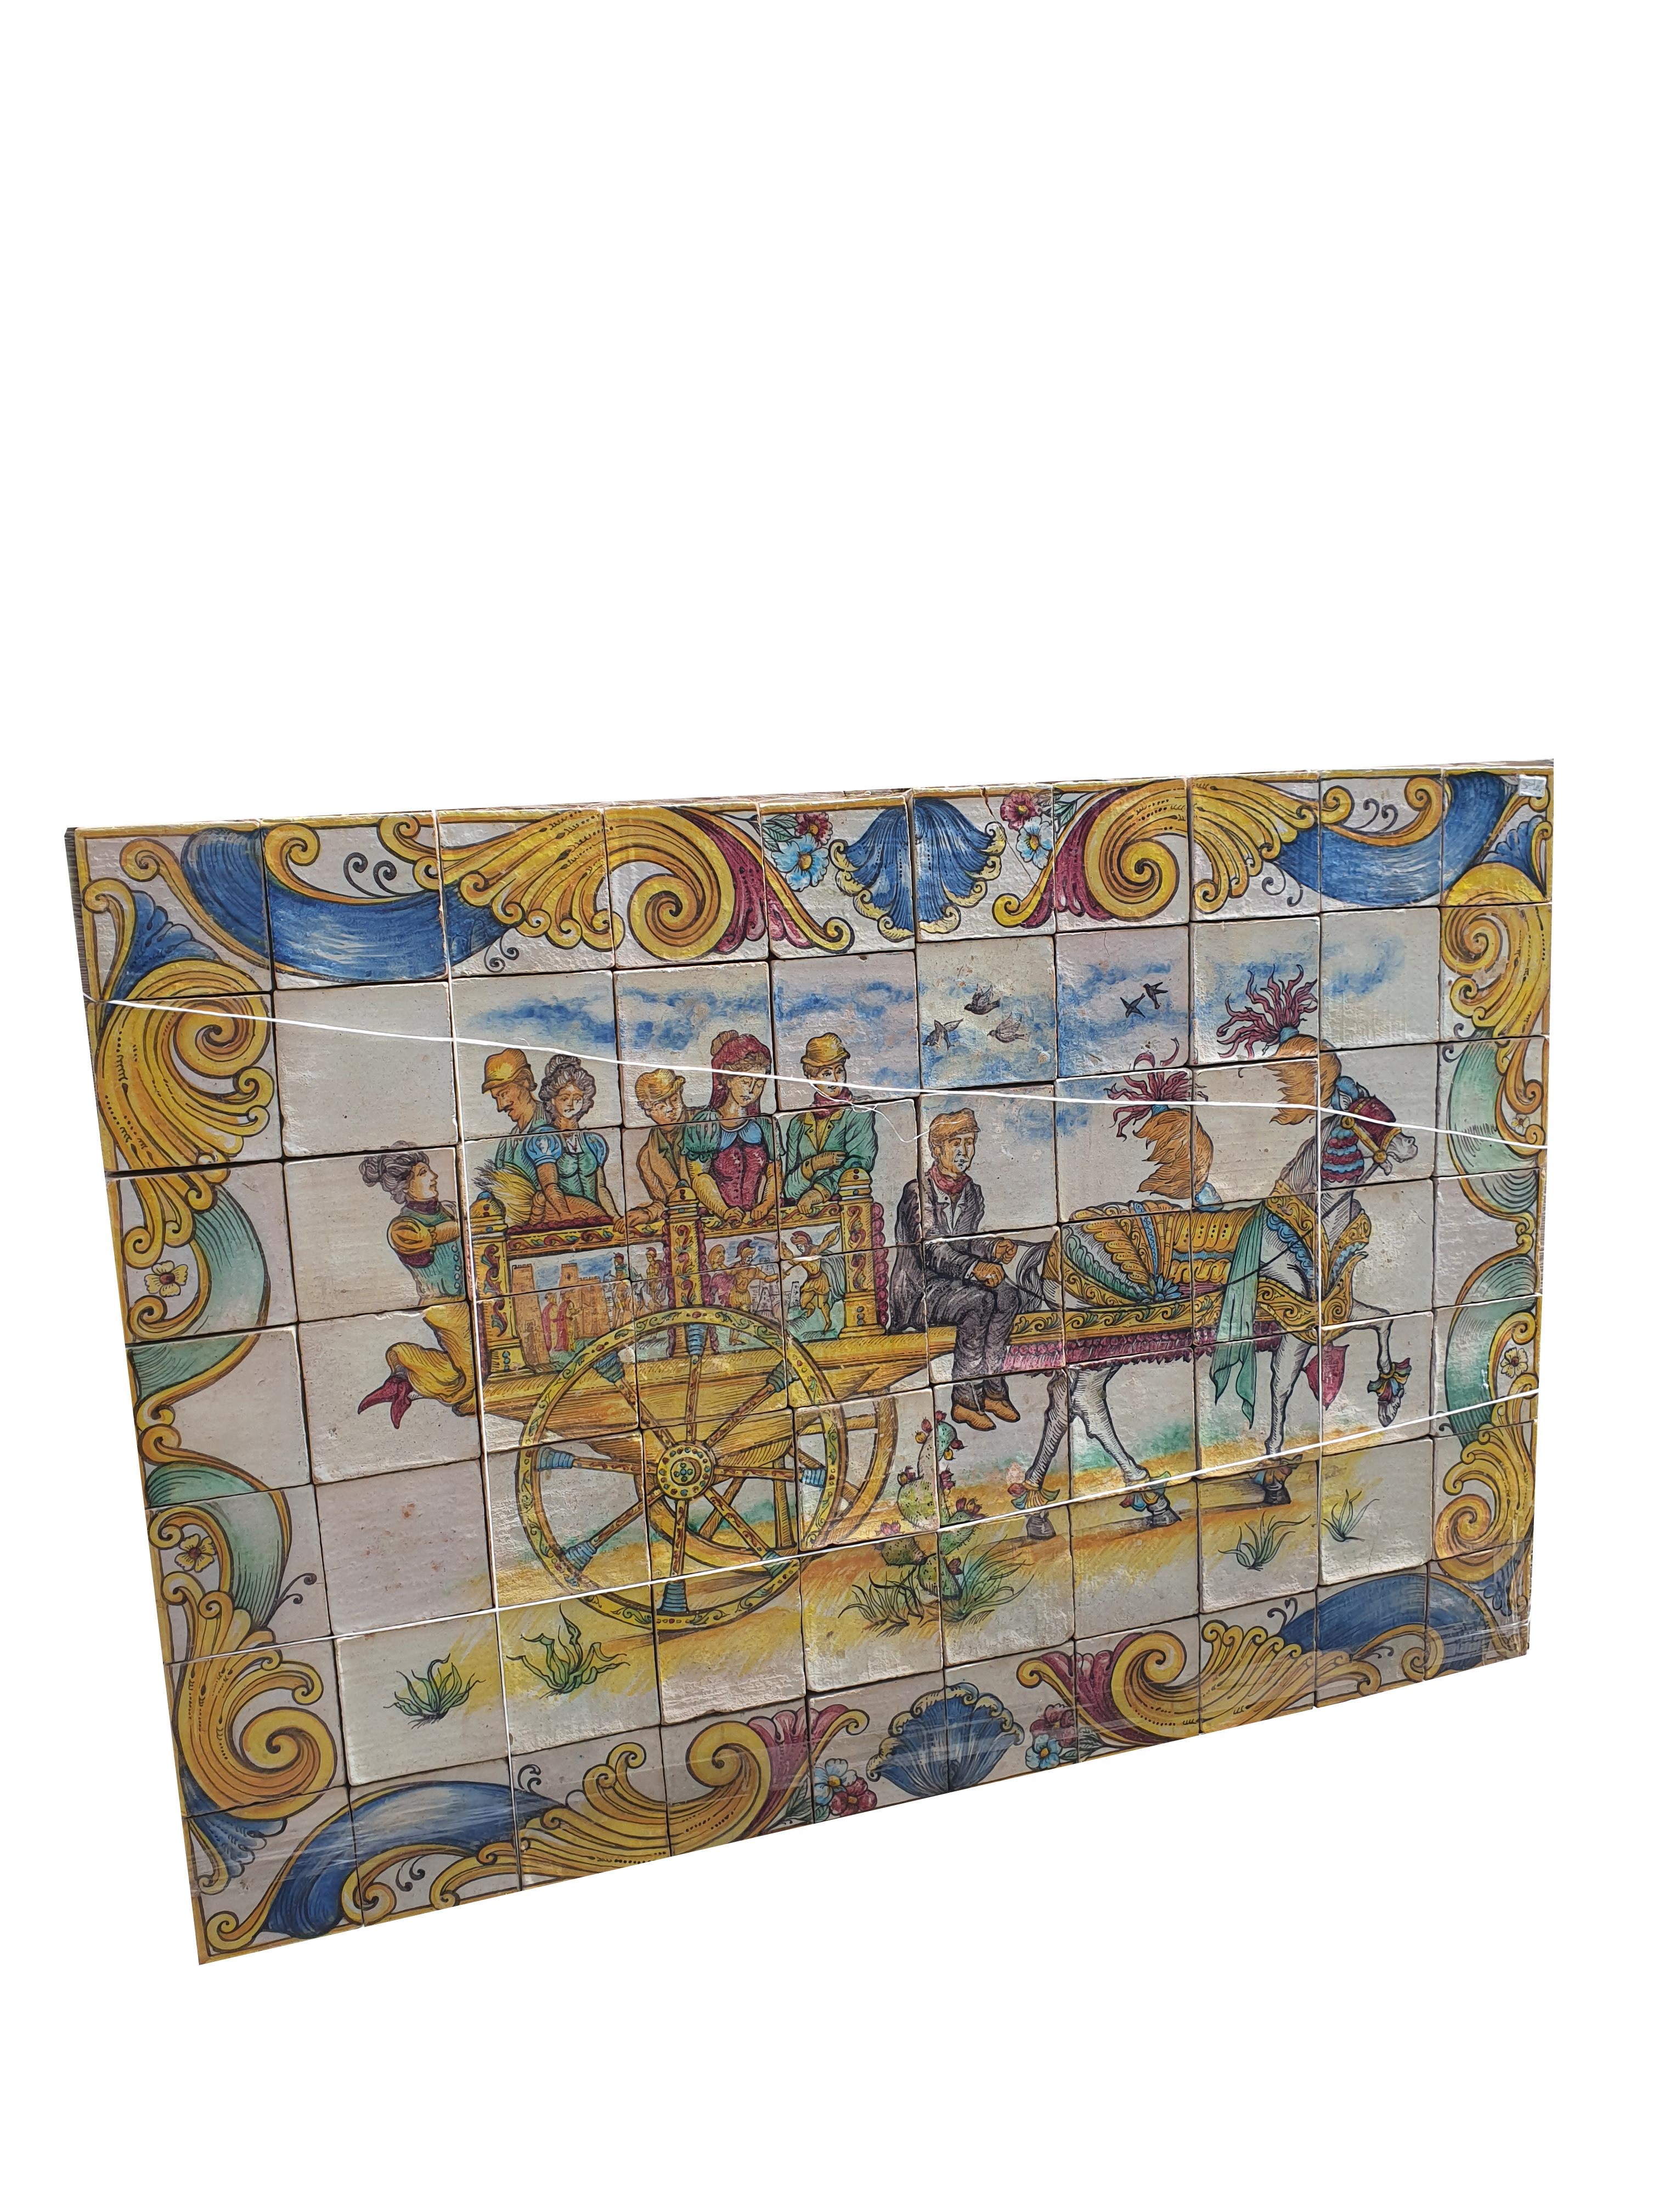 20th Cetury Sicilian Painted Majolica Panel For Sale 1